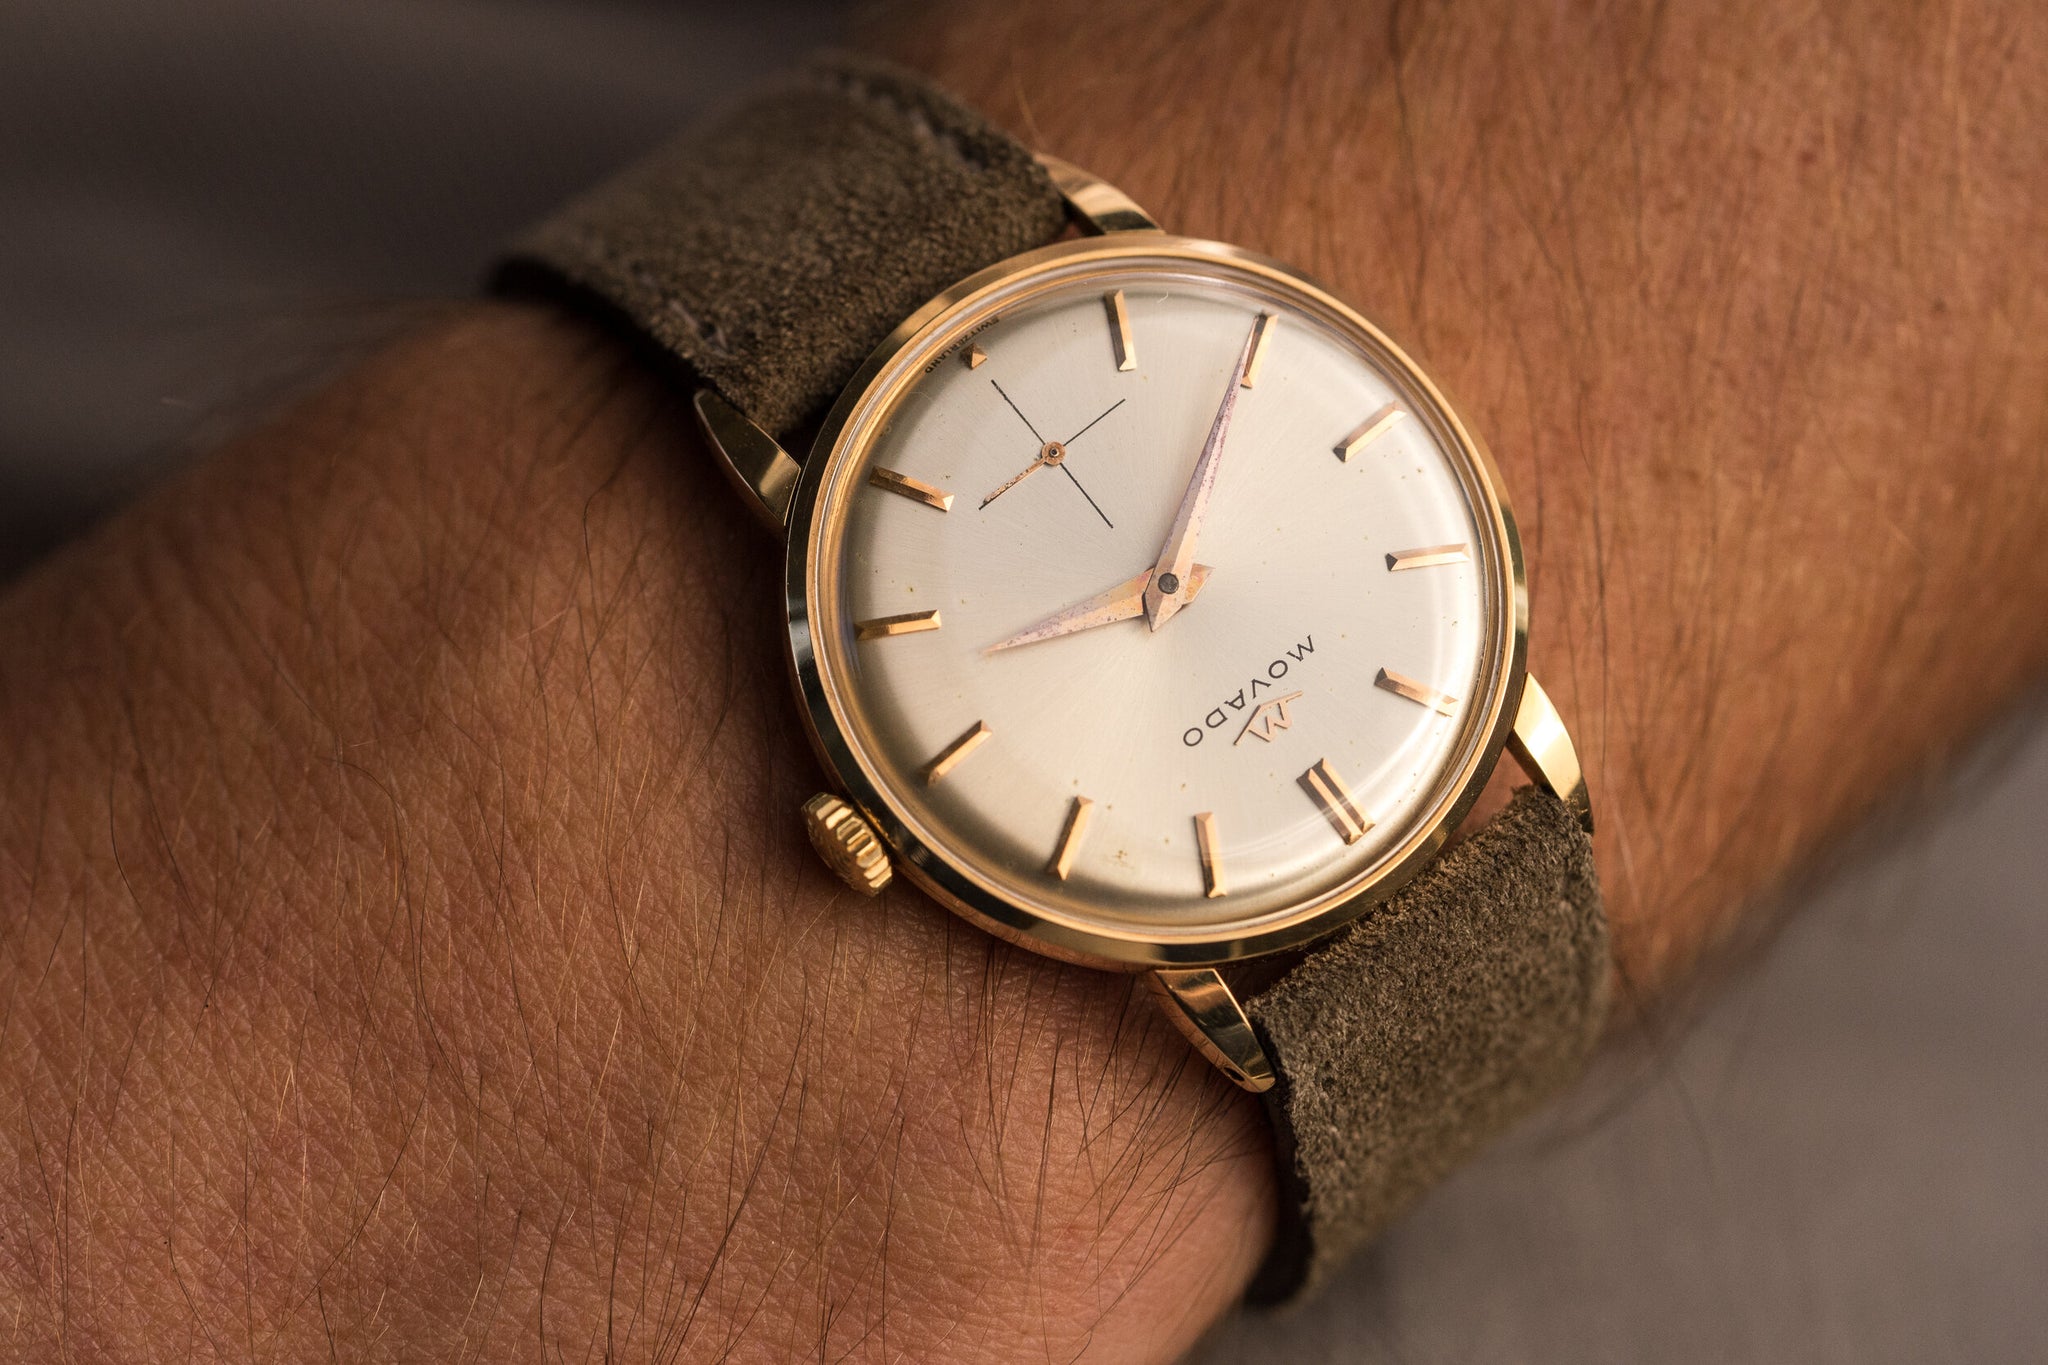 Movado Time-Only - 18k Rose Gold - 1950s